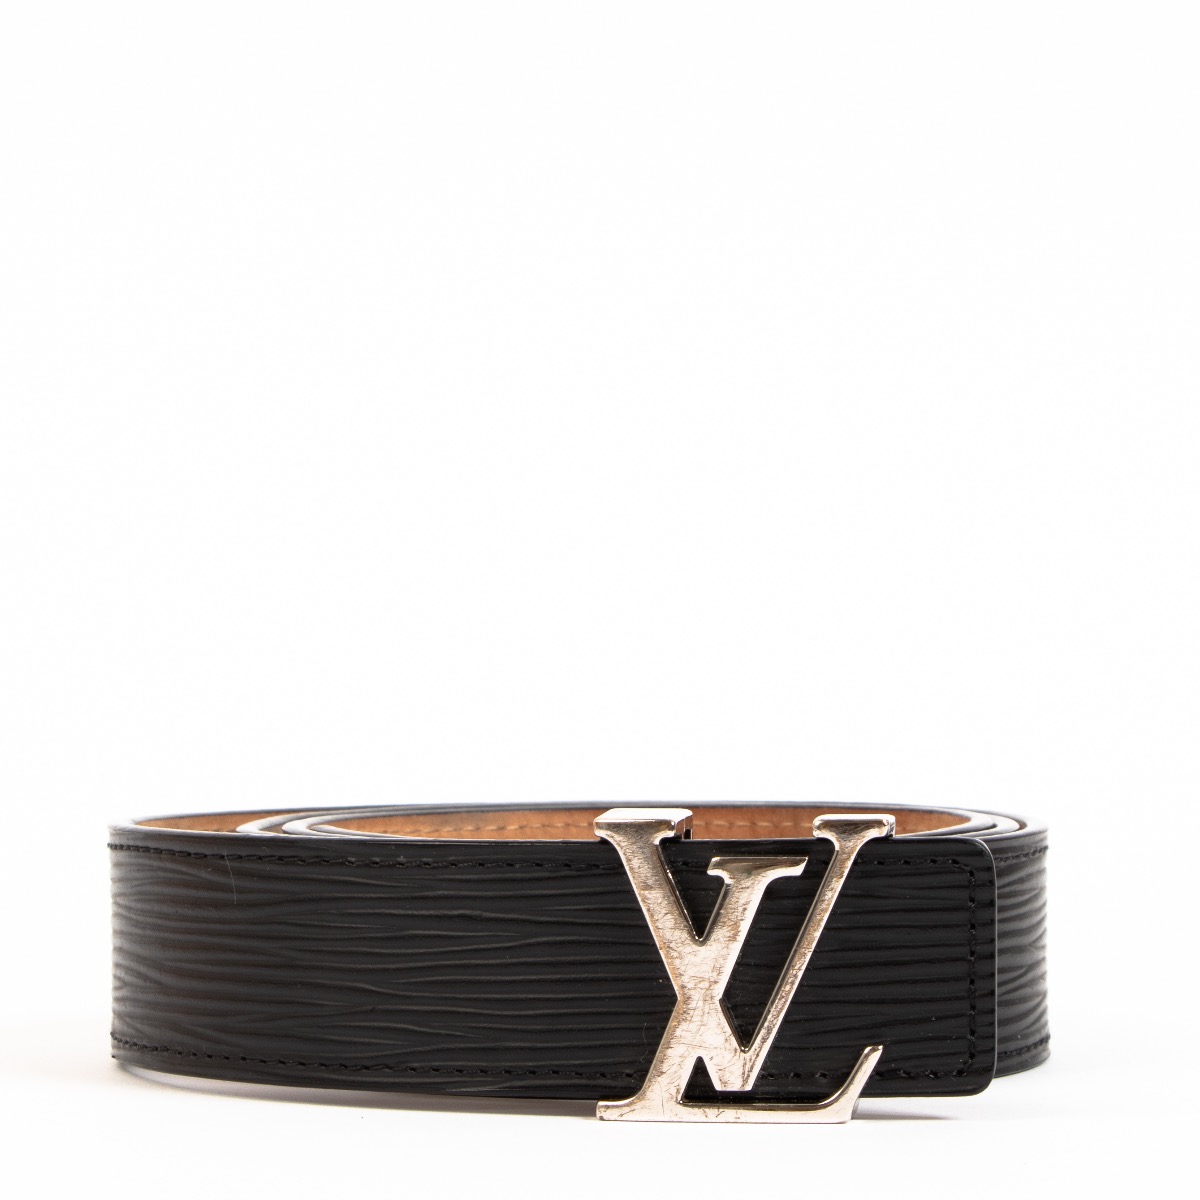 100% Authentic Brand New Louis Vuitton Belt - Size 95/38 for Sale in  Levittown, NY - OfferUp